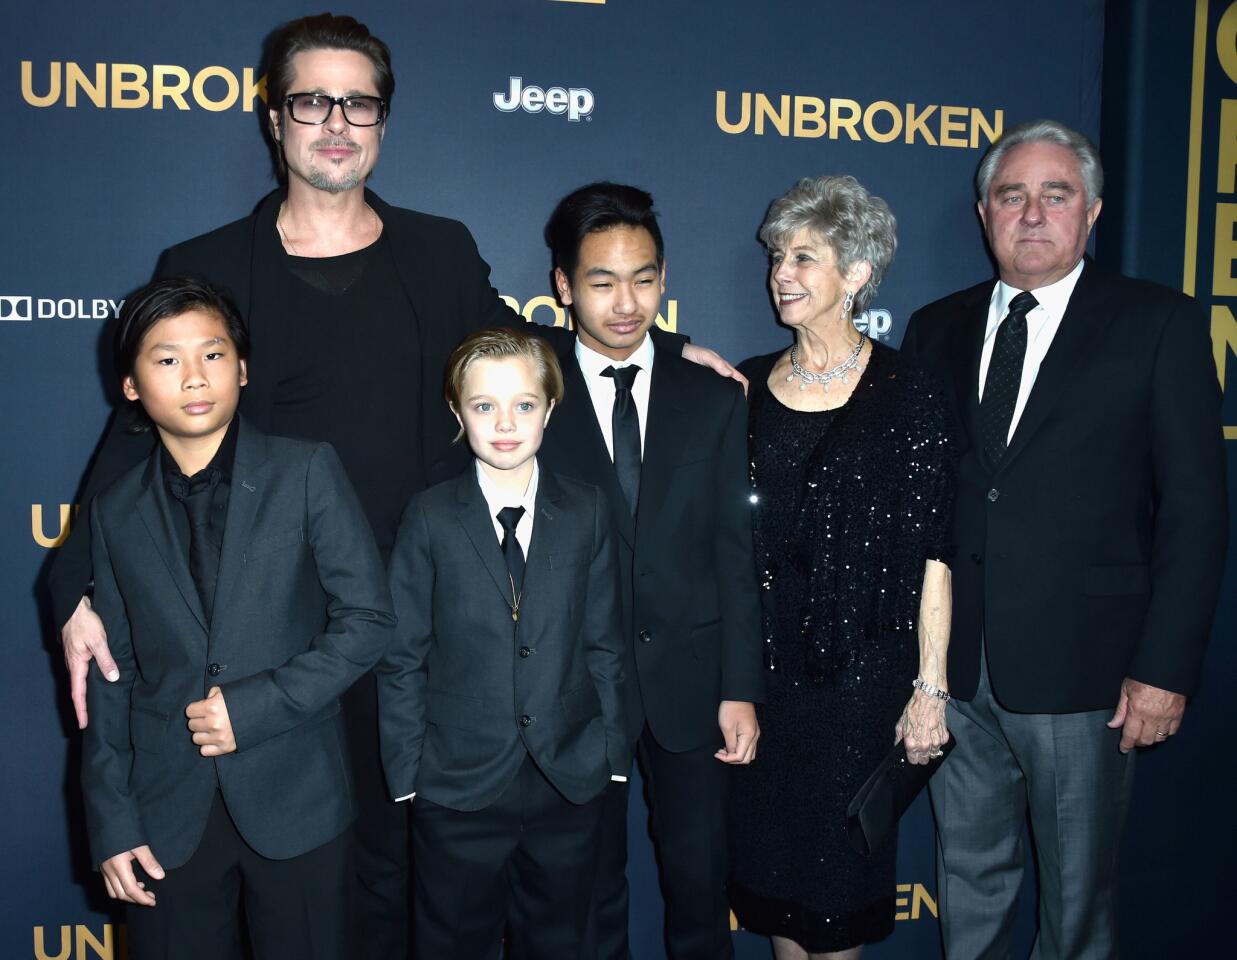 "Unbroken" director Angelina Jolie's husband Brad Pitt, kids Pax, Shiloh and Maddox and Pitt's parents, Jane and William Pitt, attend the Hollywood premiere of the film while Jolie deals with chicken pox.